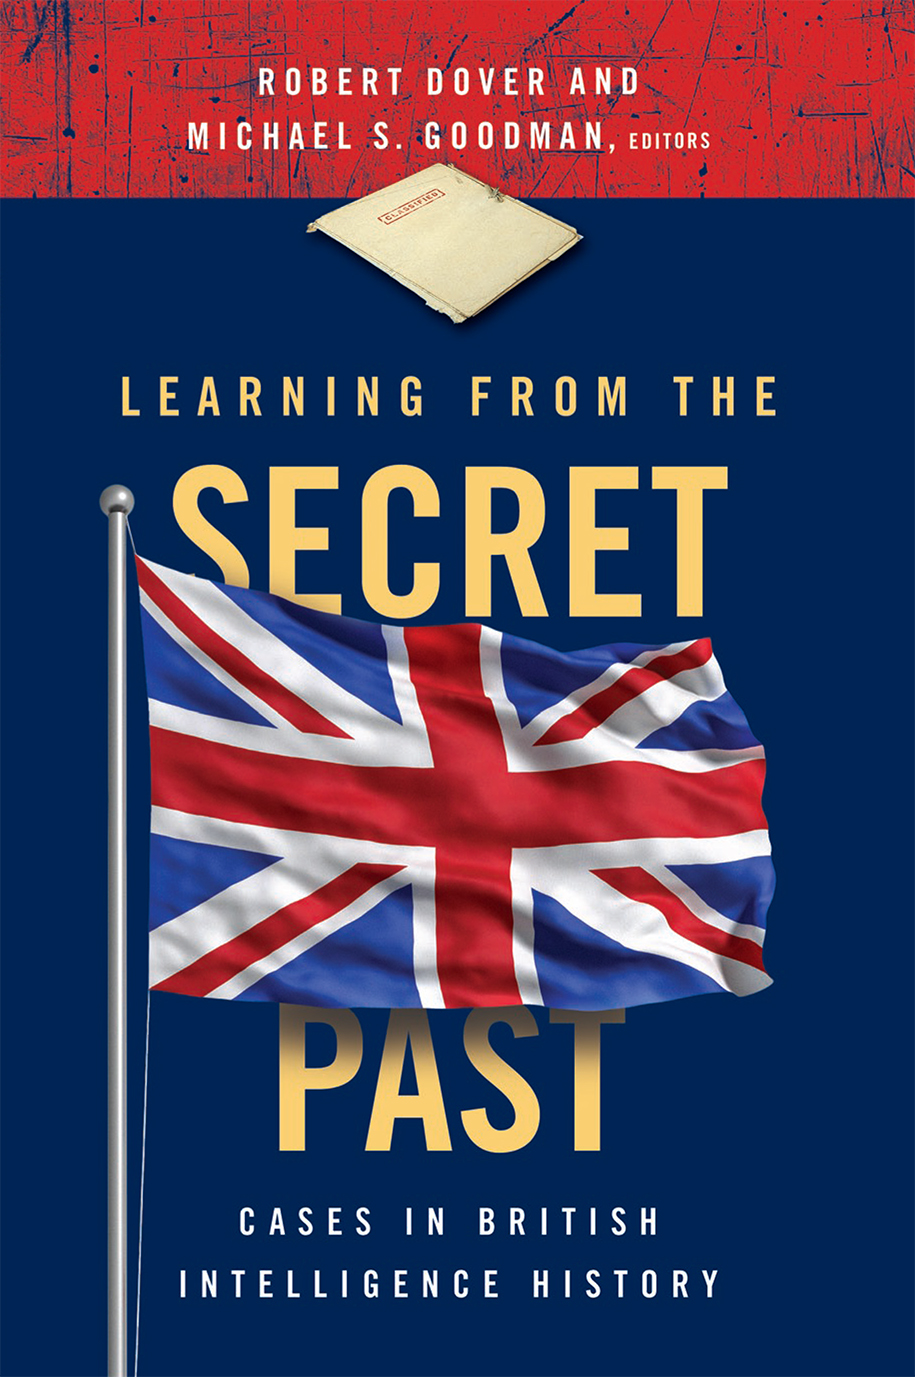 the british rail case study learning from the past